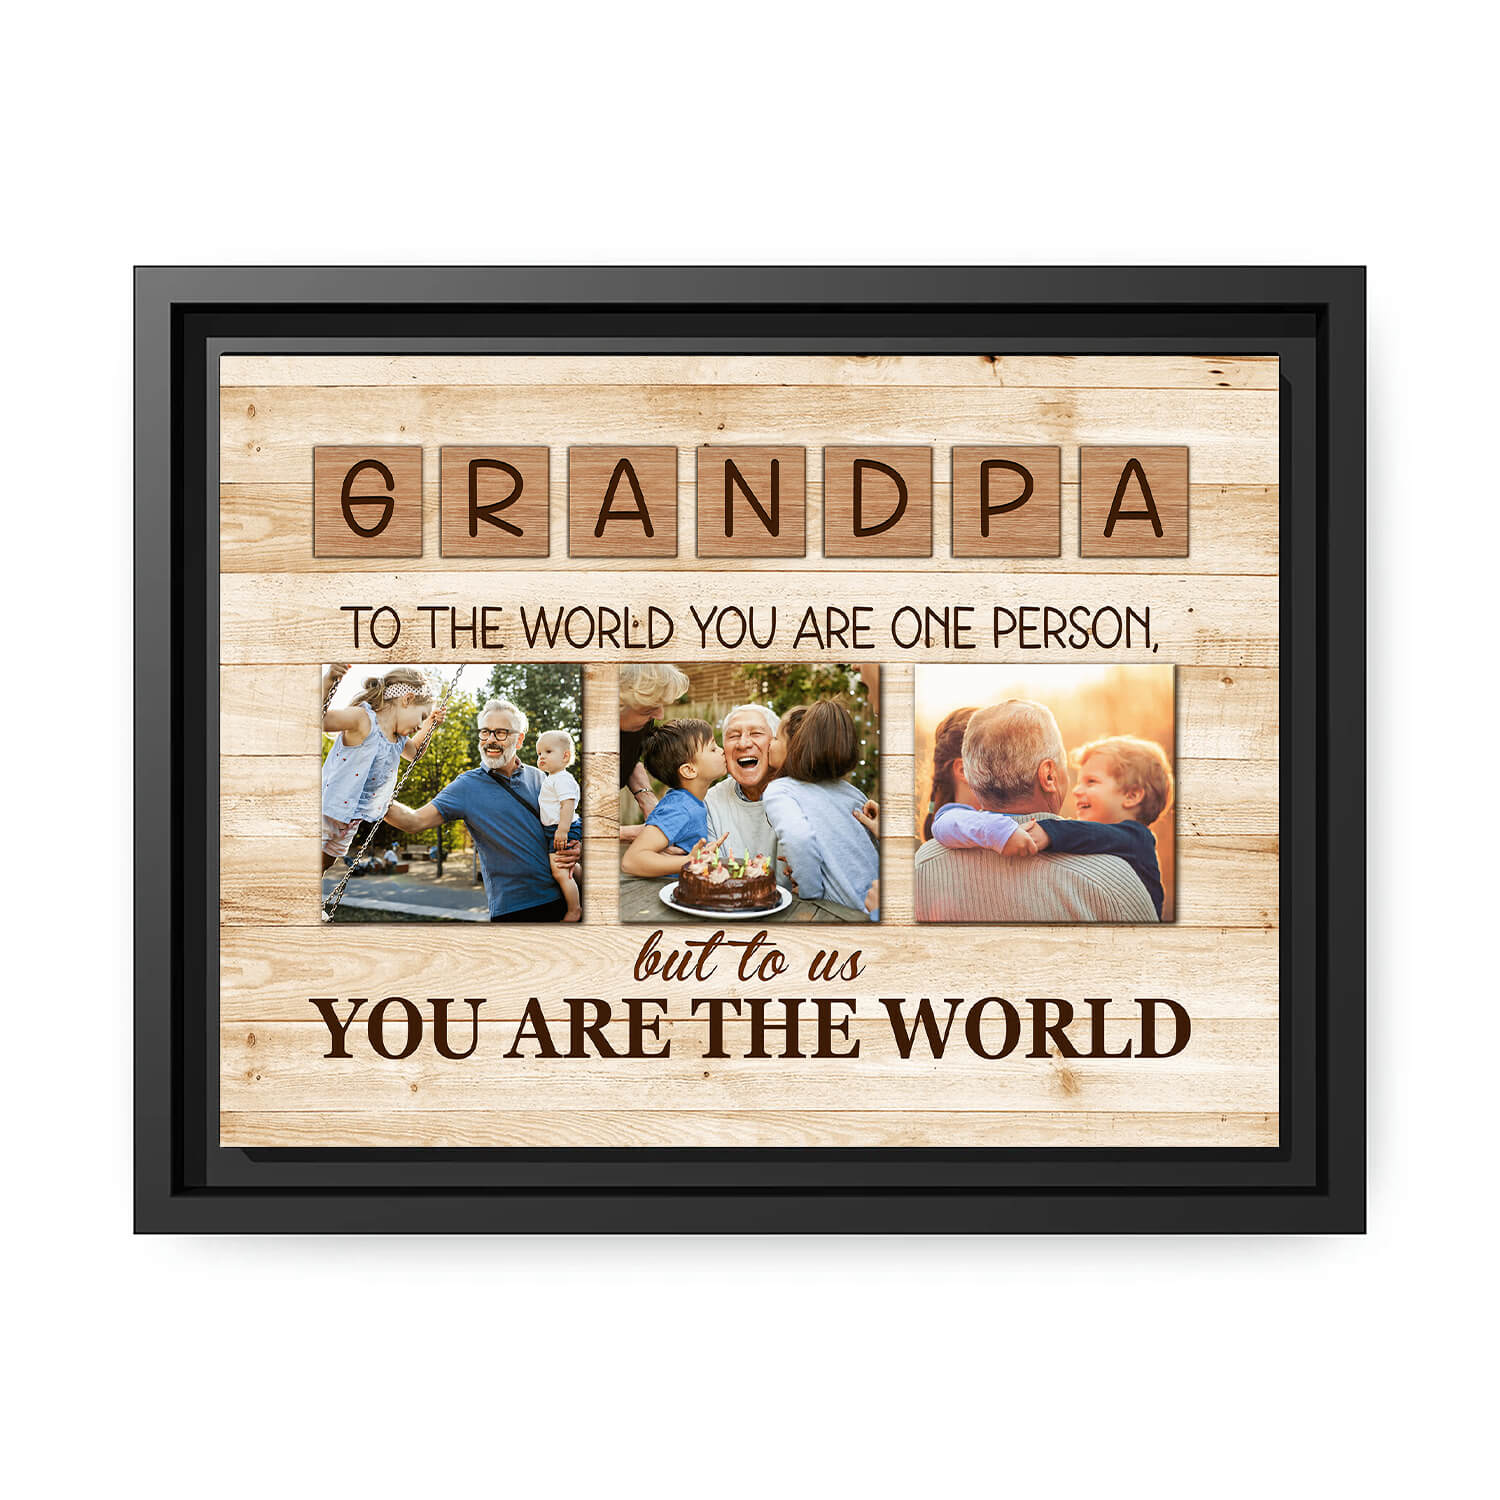 You are the world - Personalized Father's Day or Birthday gift for Grandpa - Custom Canvas Print - MyMindfulGifts